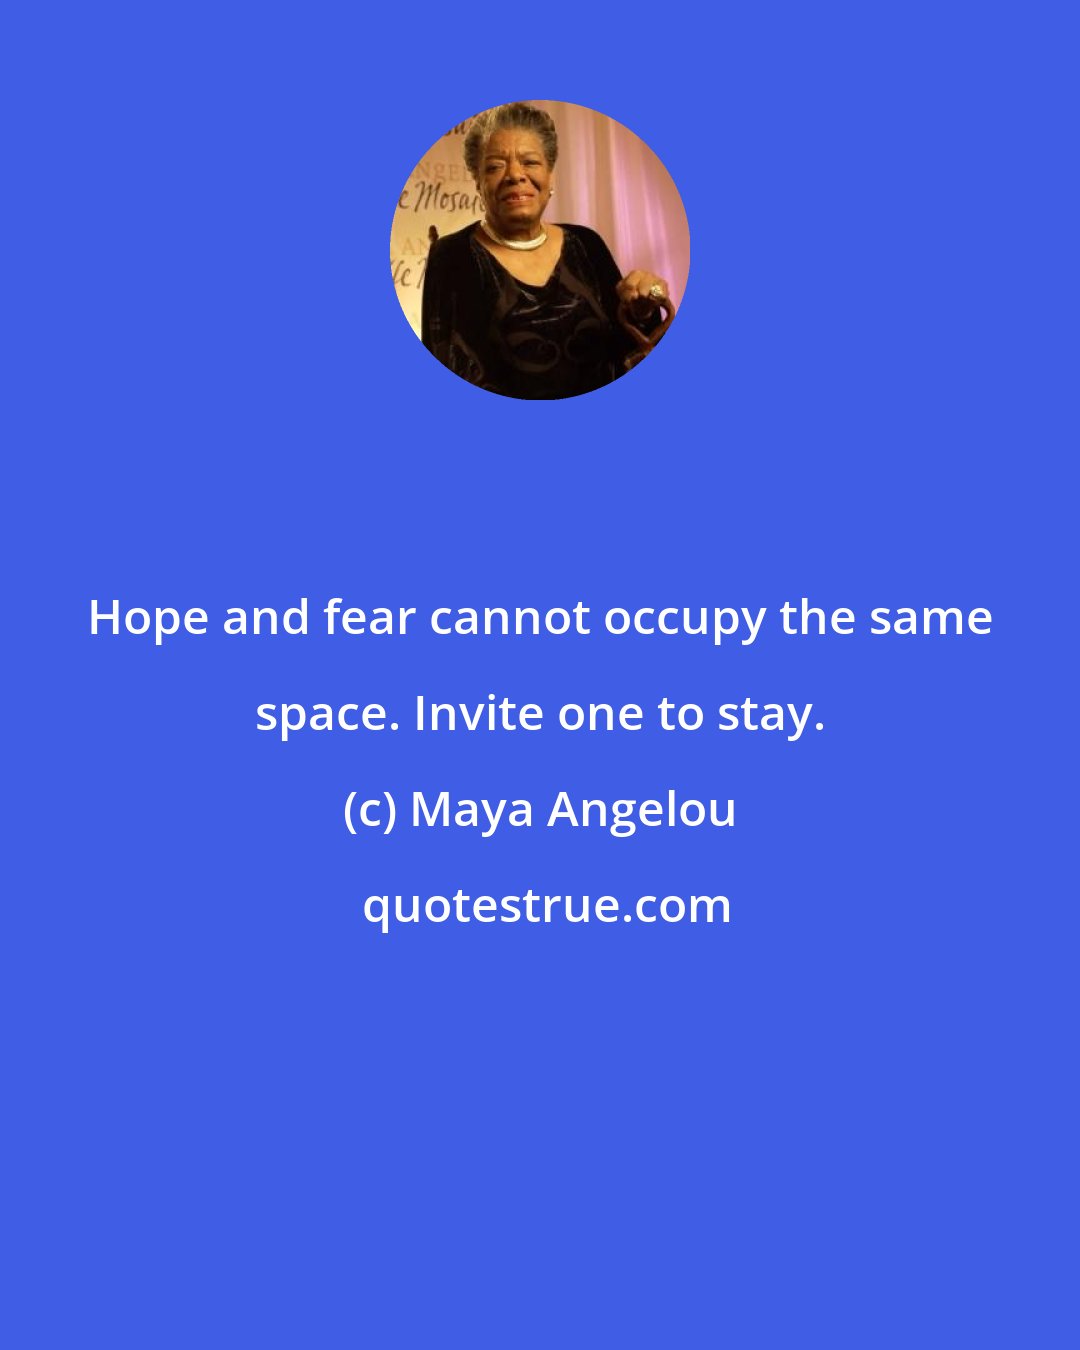 Maya Angelou: Hope and fear cannot occupy the same space. Invite one to stay.